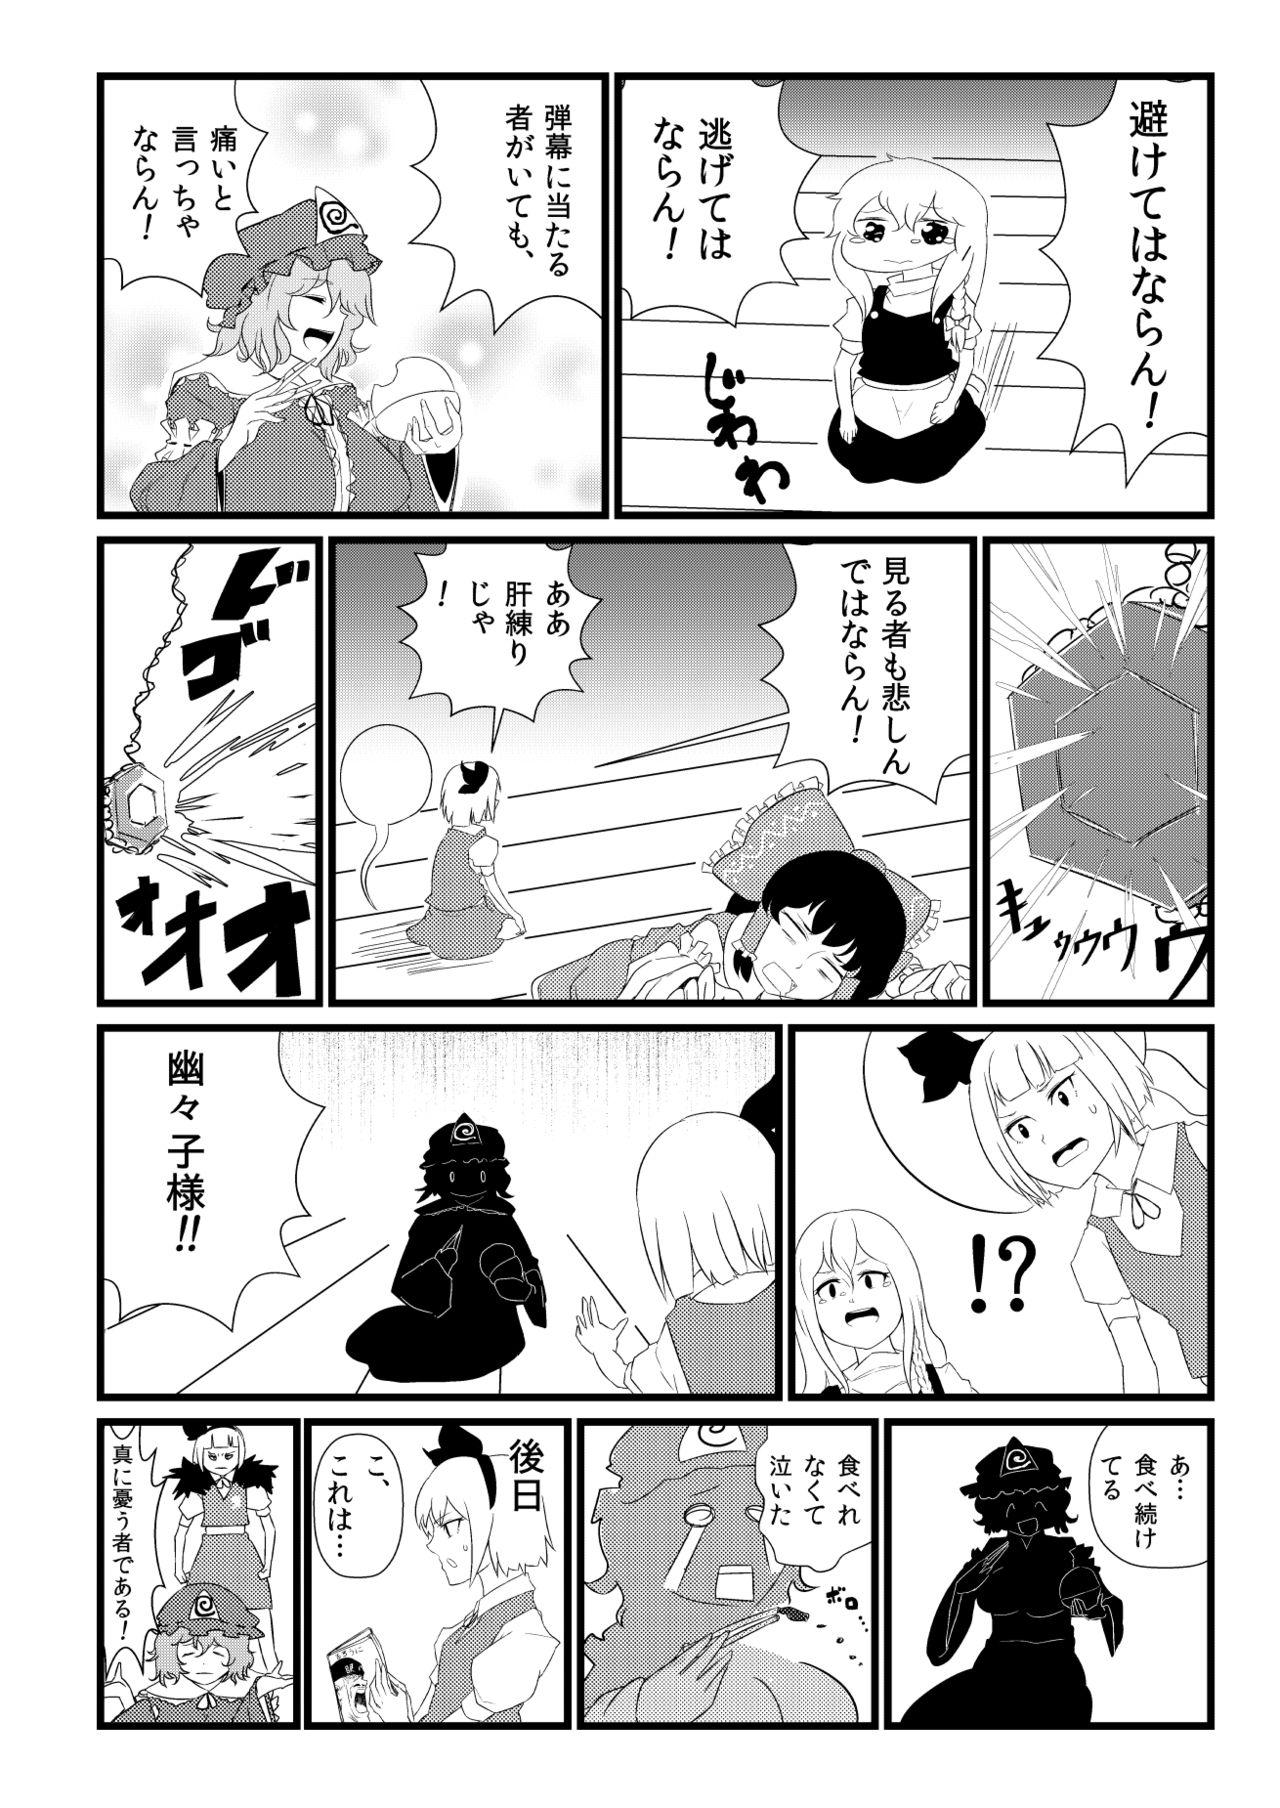 Perfect Tits 東方板としあき合同誌5 - Touhou project Real Amateur - Page 4